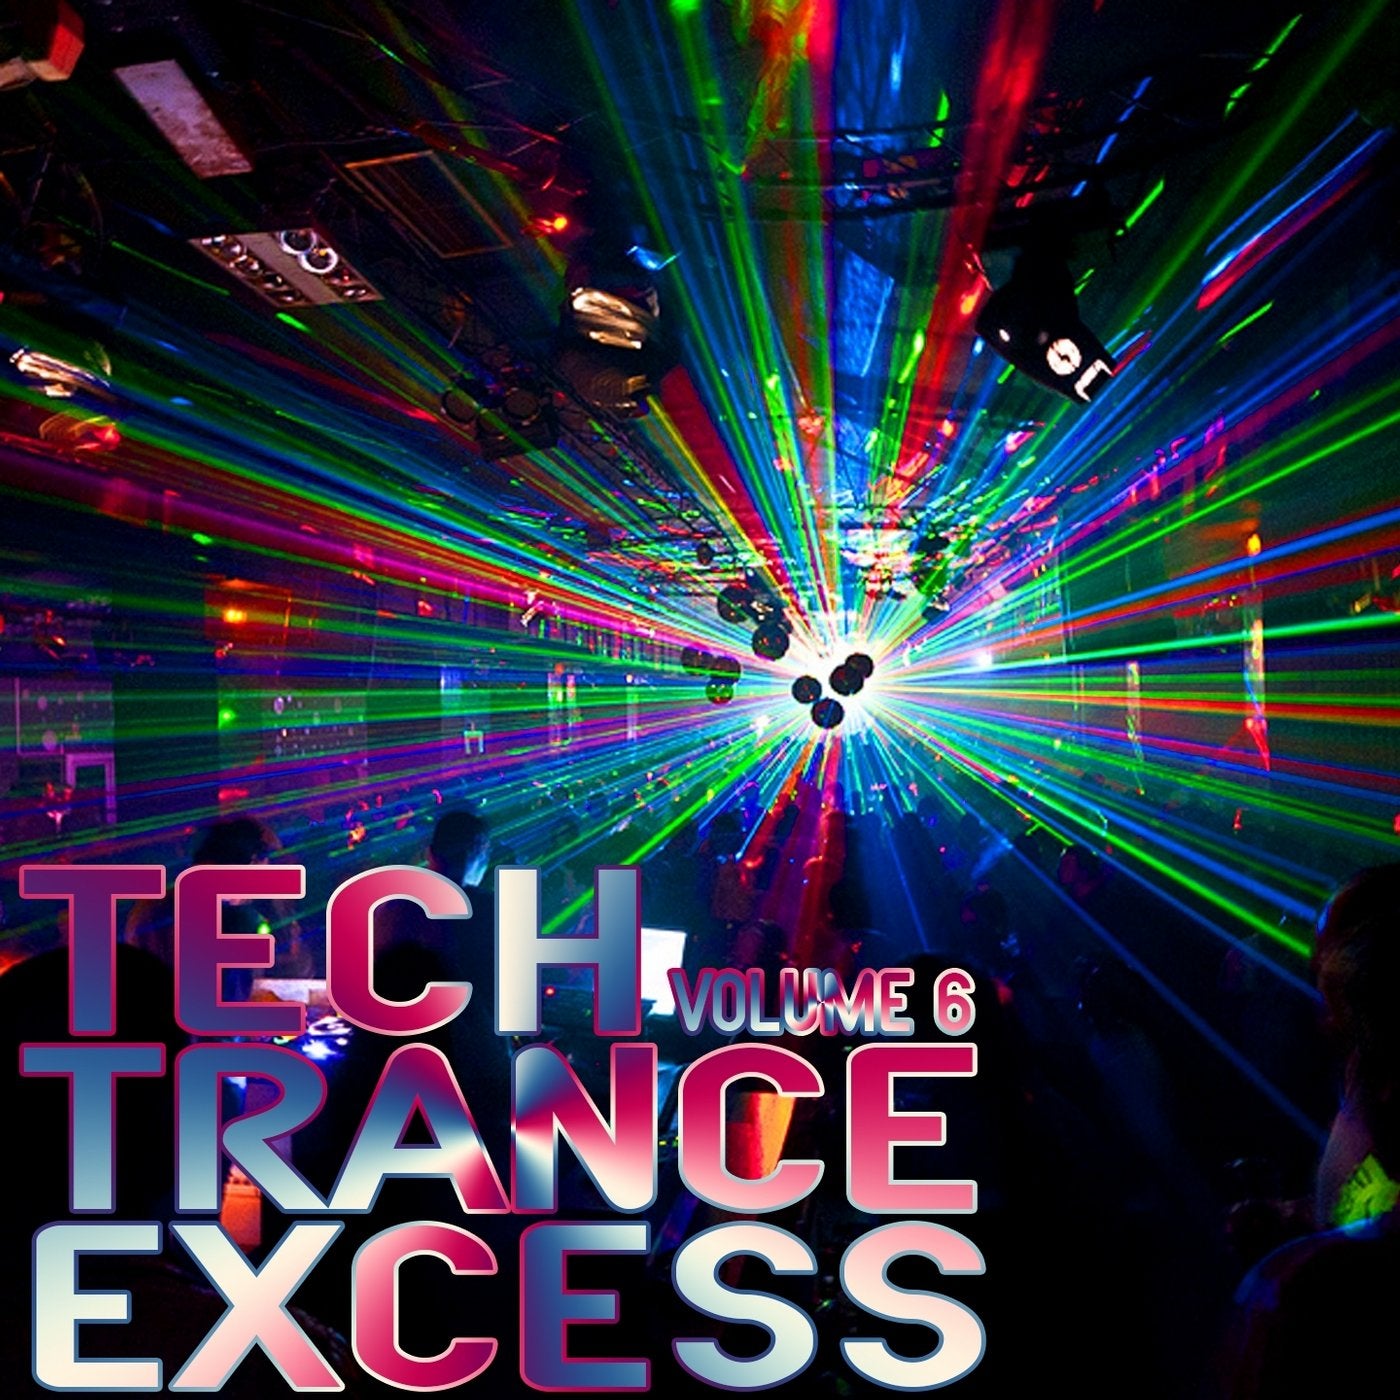 Tech Trance Excess, Vol.6 (Best Selection of Tech Trance)